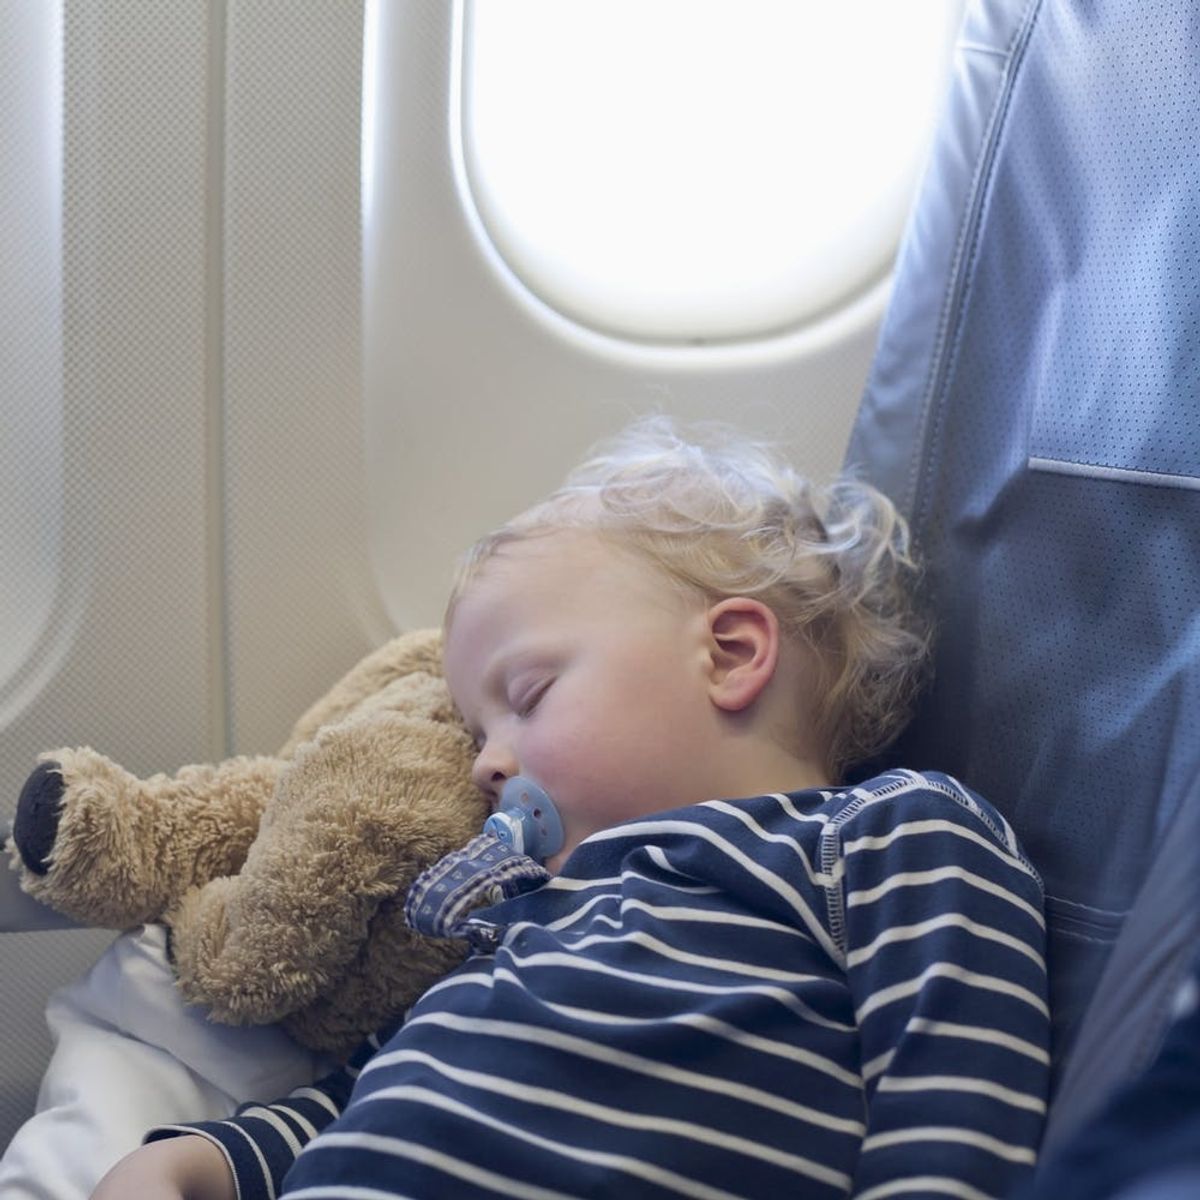 How to Make Flying With Kids Less Stressful, According to Flight Attendants